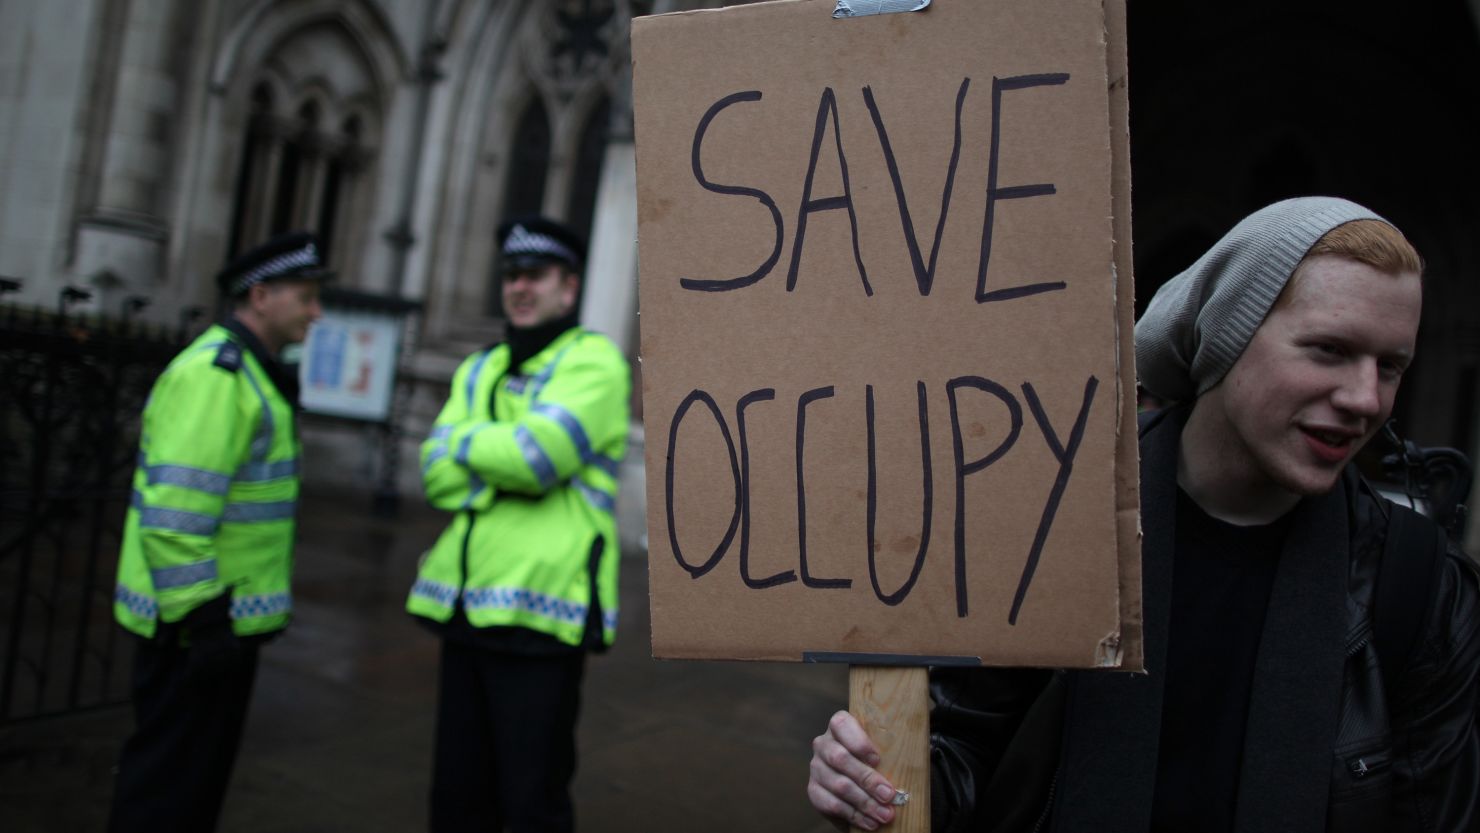 Occupy London protesters have been camped outside St Paul's Cathedral in the City of London since last October.